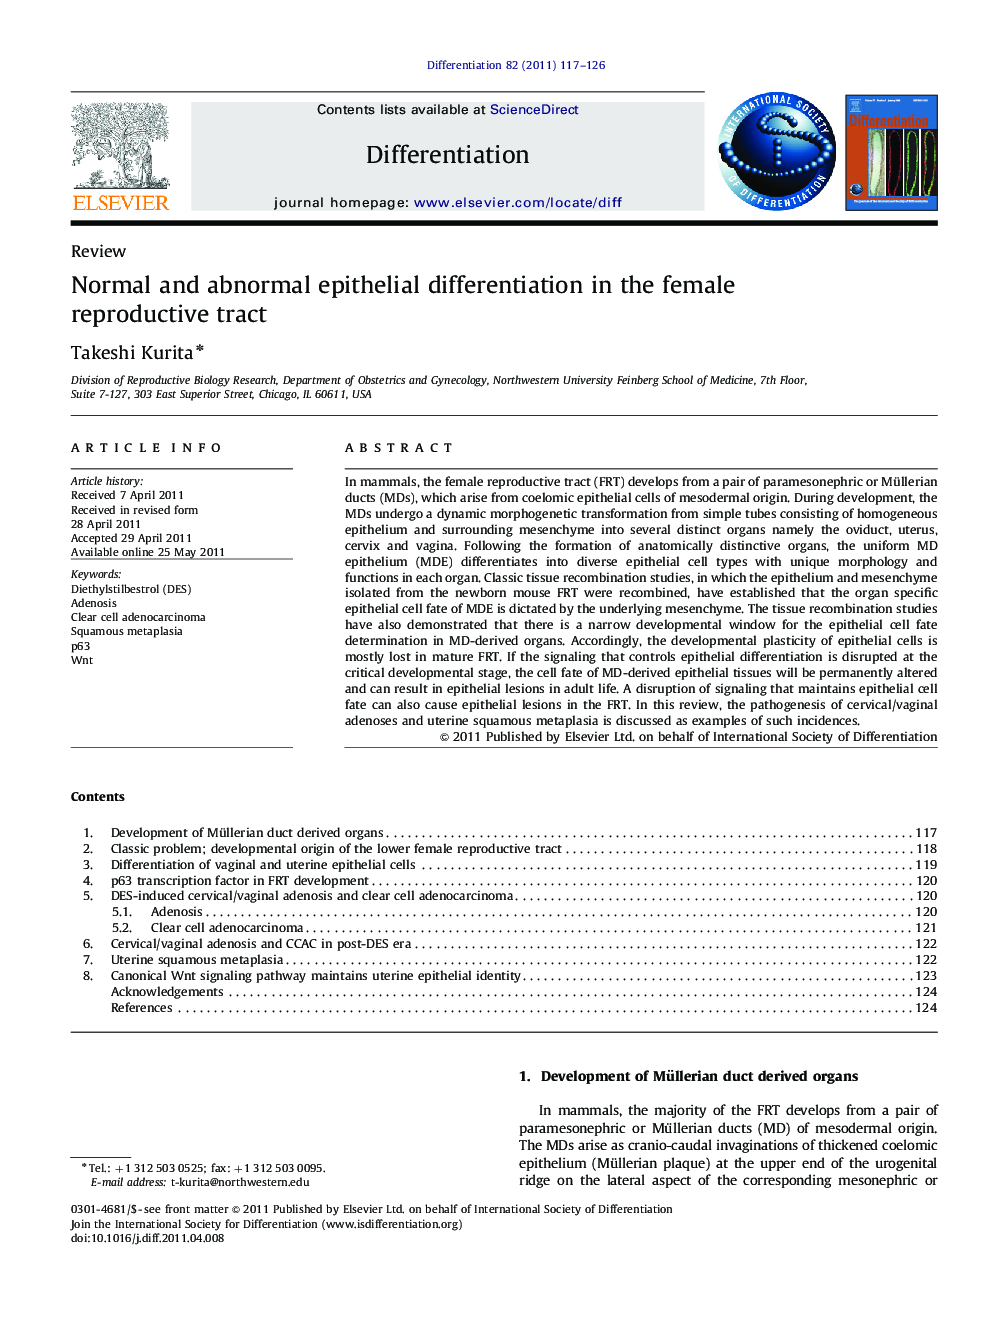 Normal and abnormal epithelial differentiation in the female reproductive tract